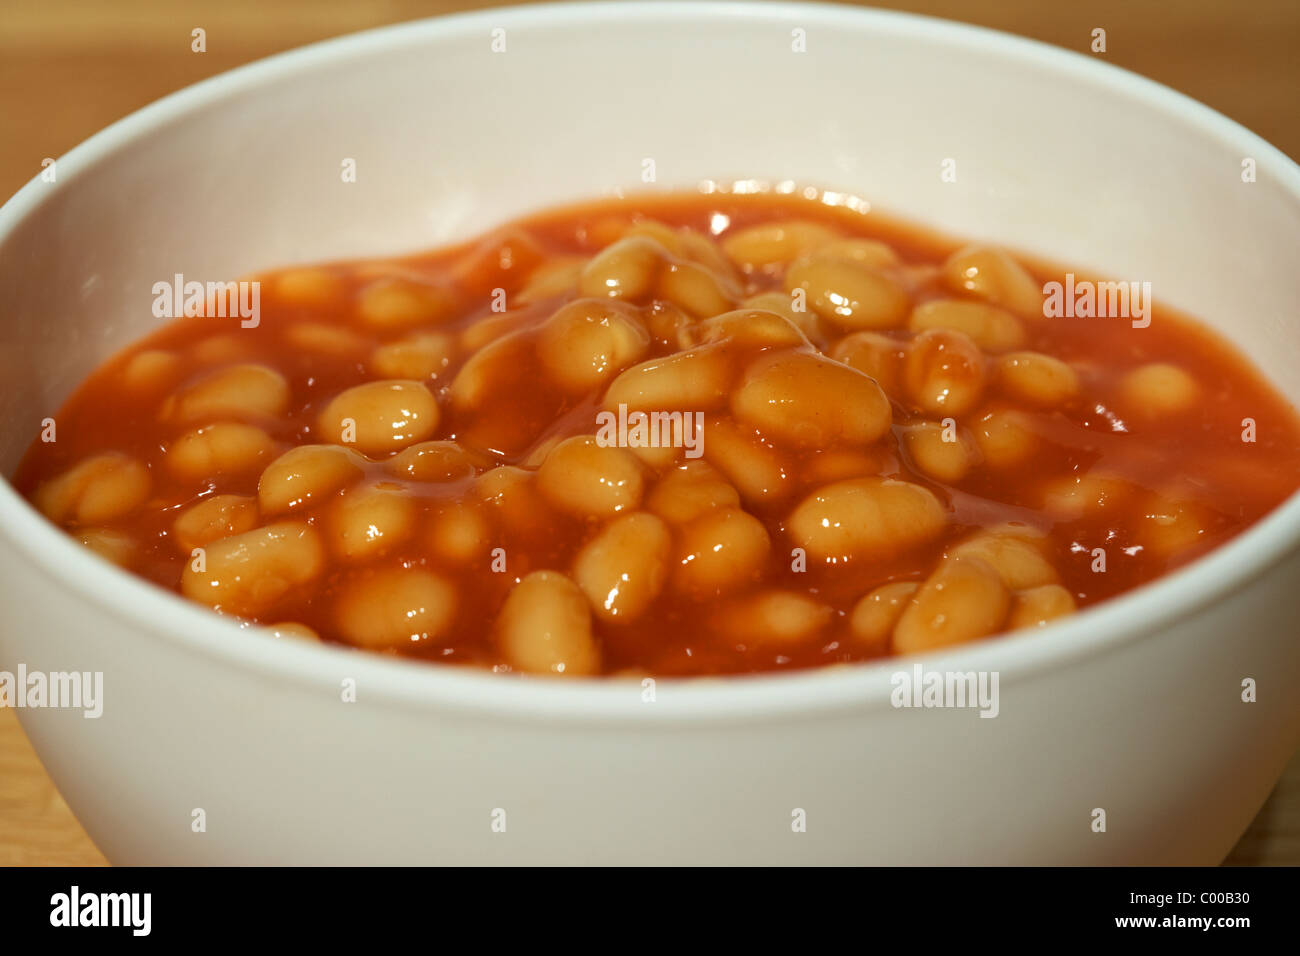 plastic bowl of baked beans in tomato sauce ready for microwave cooking Stock Photo